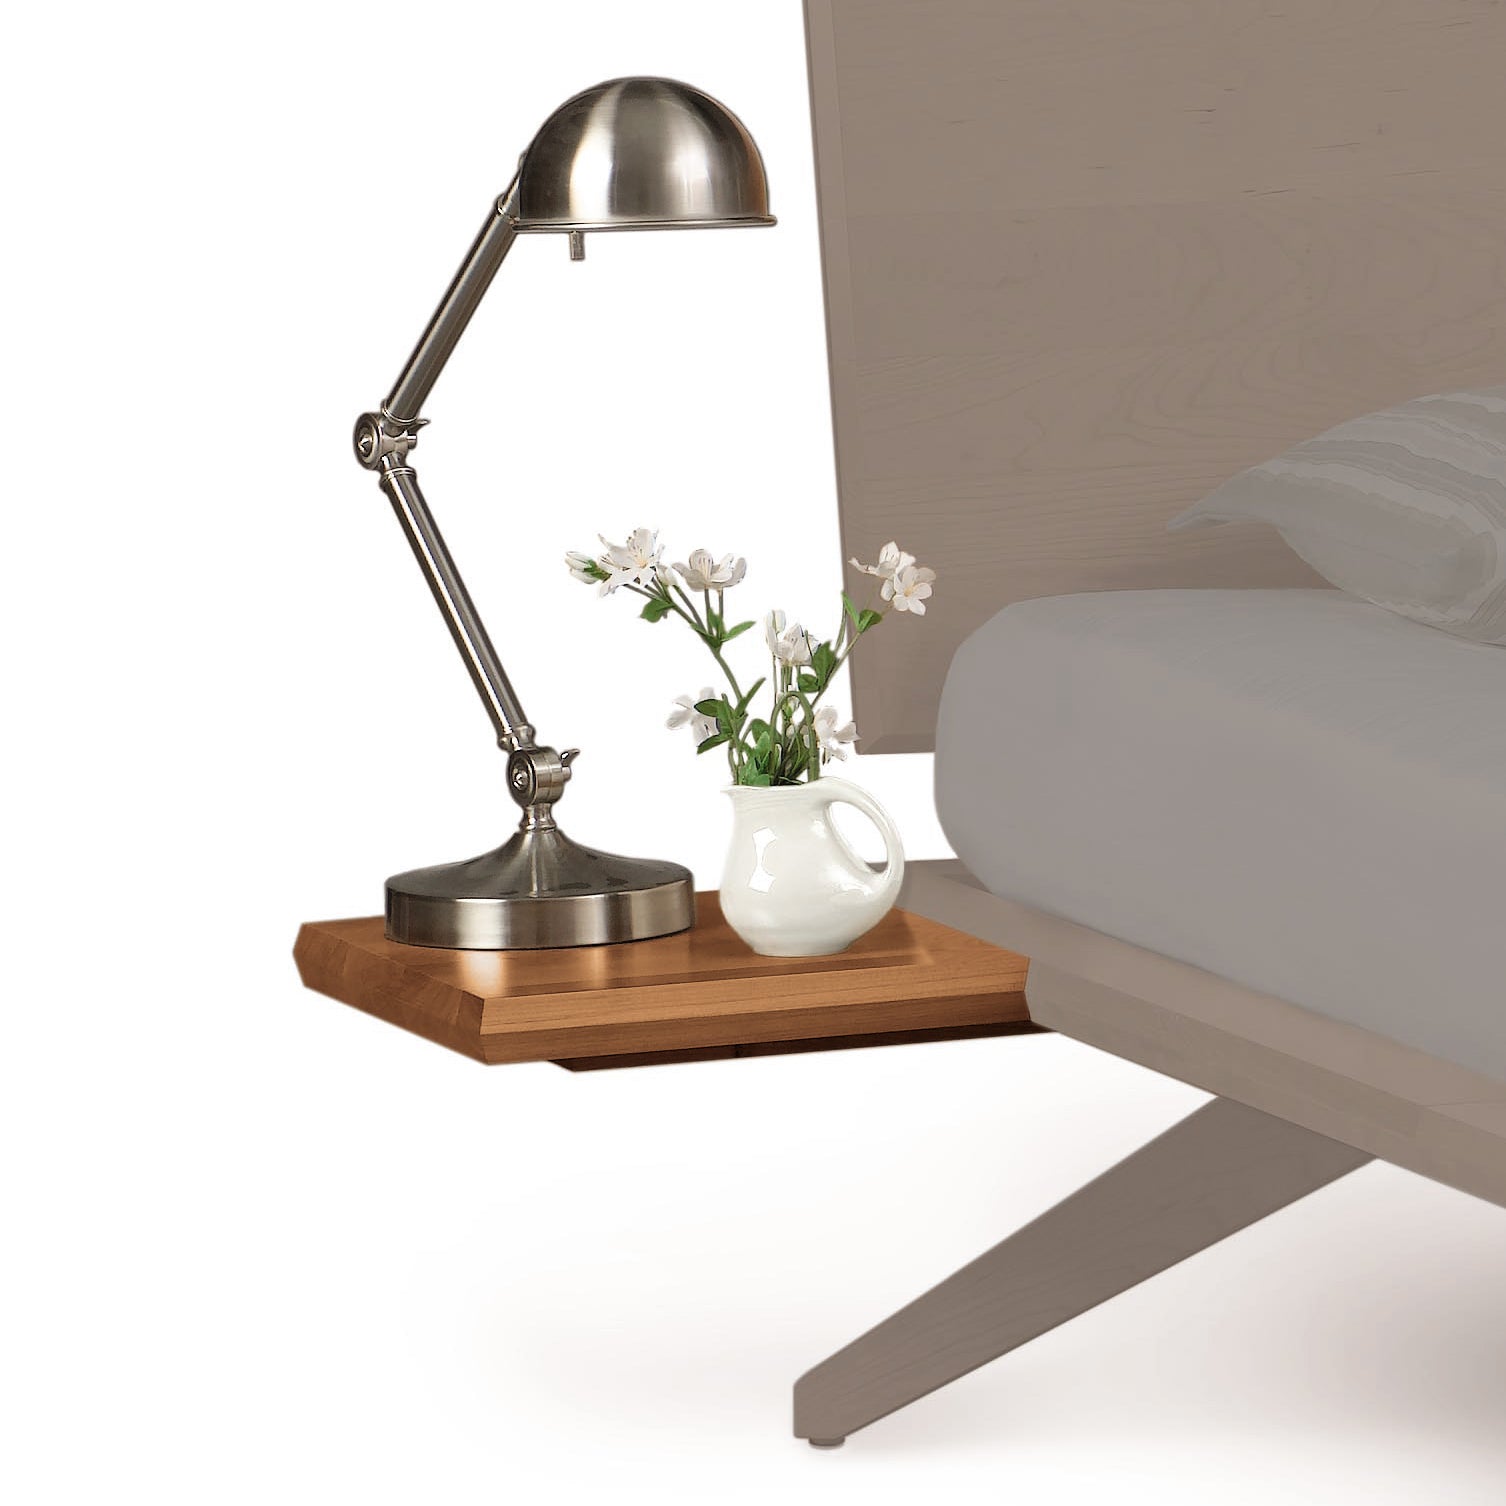 A minimalist style desk lamp with an adjustable arm is positioned on a Copeland Furniture Astrid Shelf Nightstand next to a small white vase with fresh flowers.